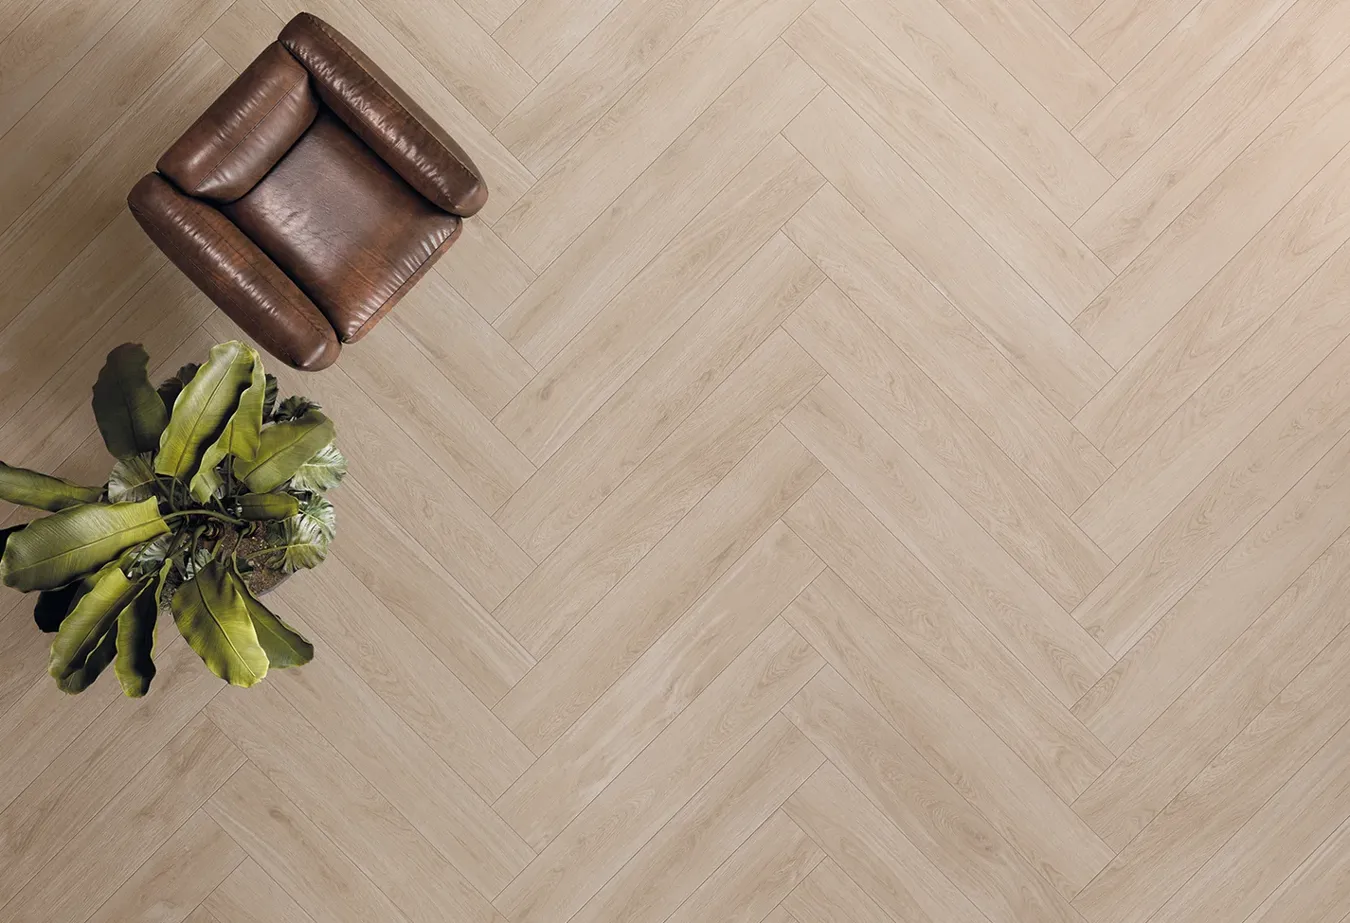 Luxury flooring with white herringbone wood-effect tiles from the Lineo collection, brown leather armchair, and green plant.